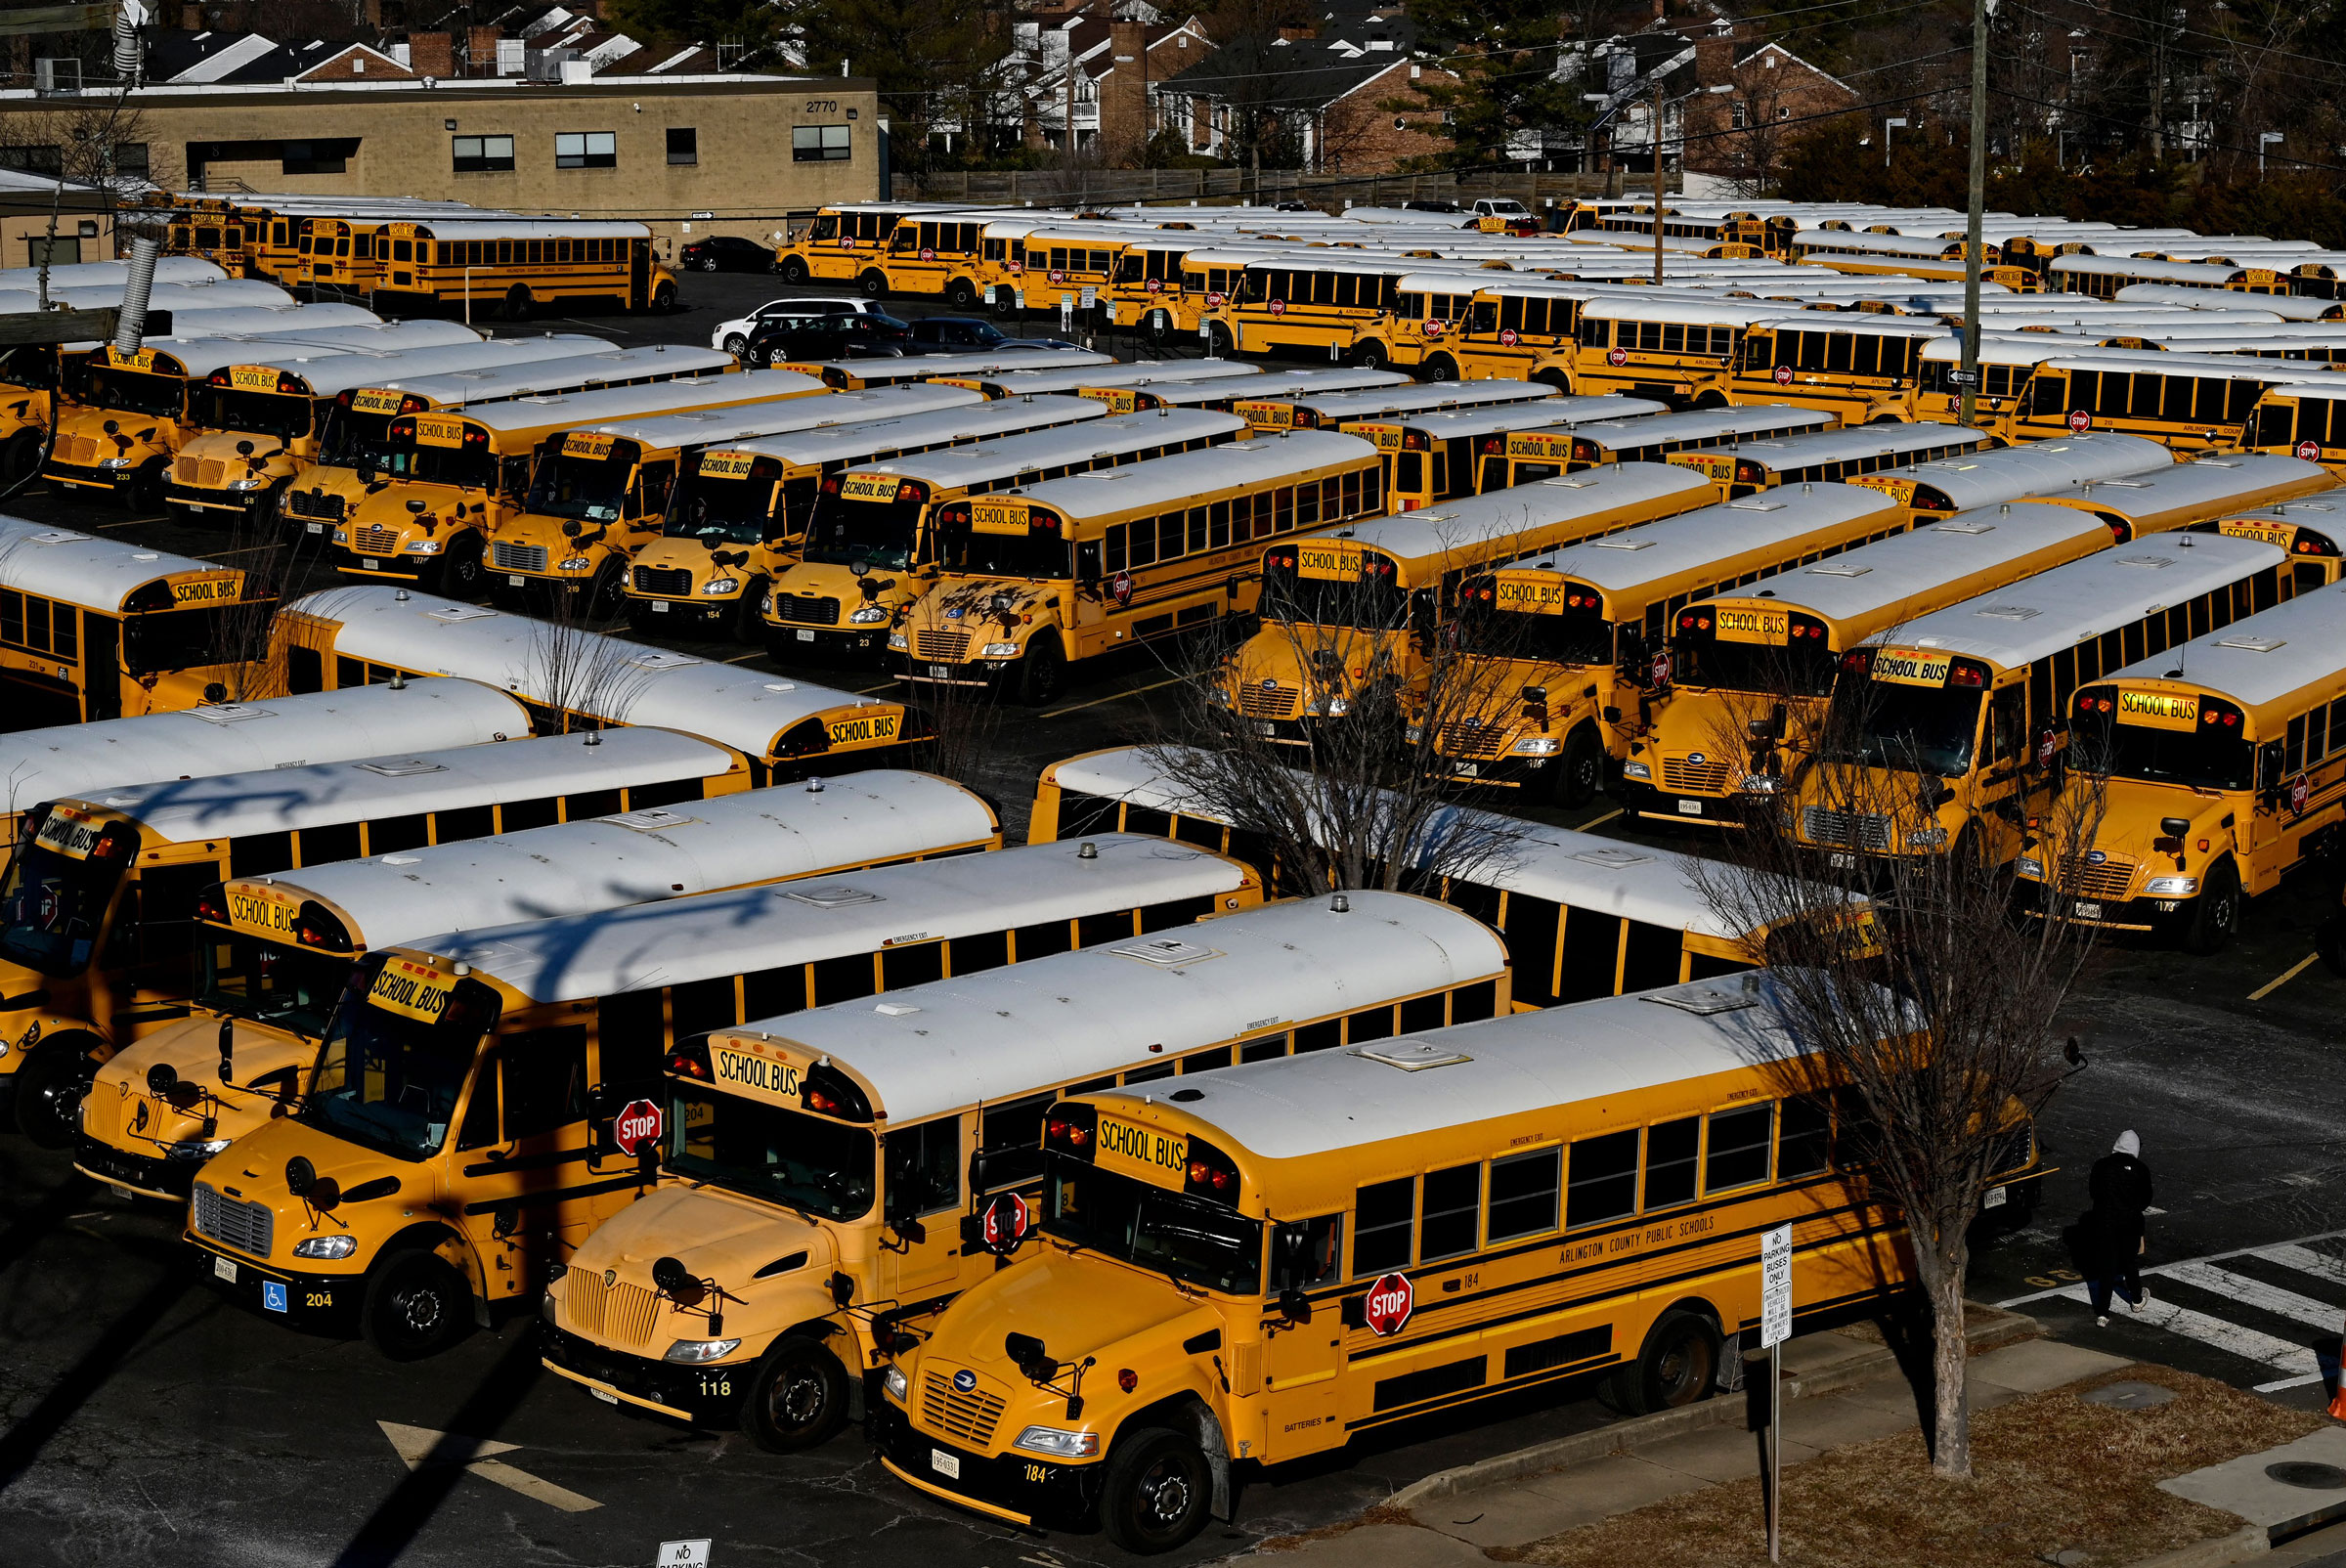 School buses are parked at the Arlington County Bus Depot